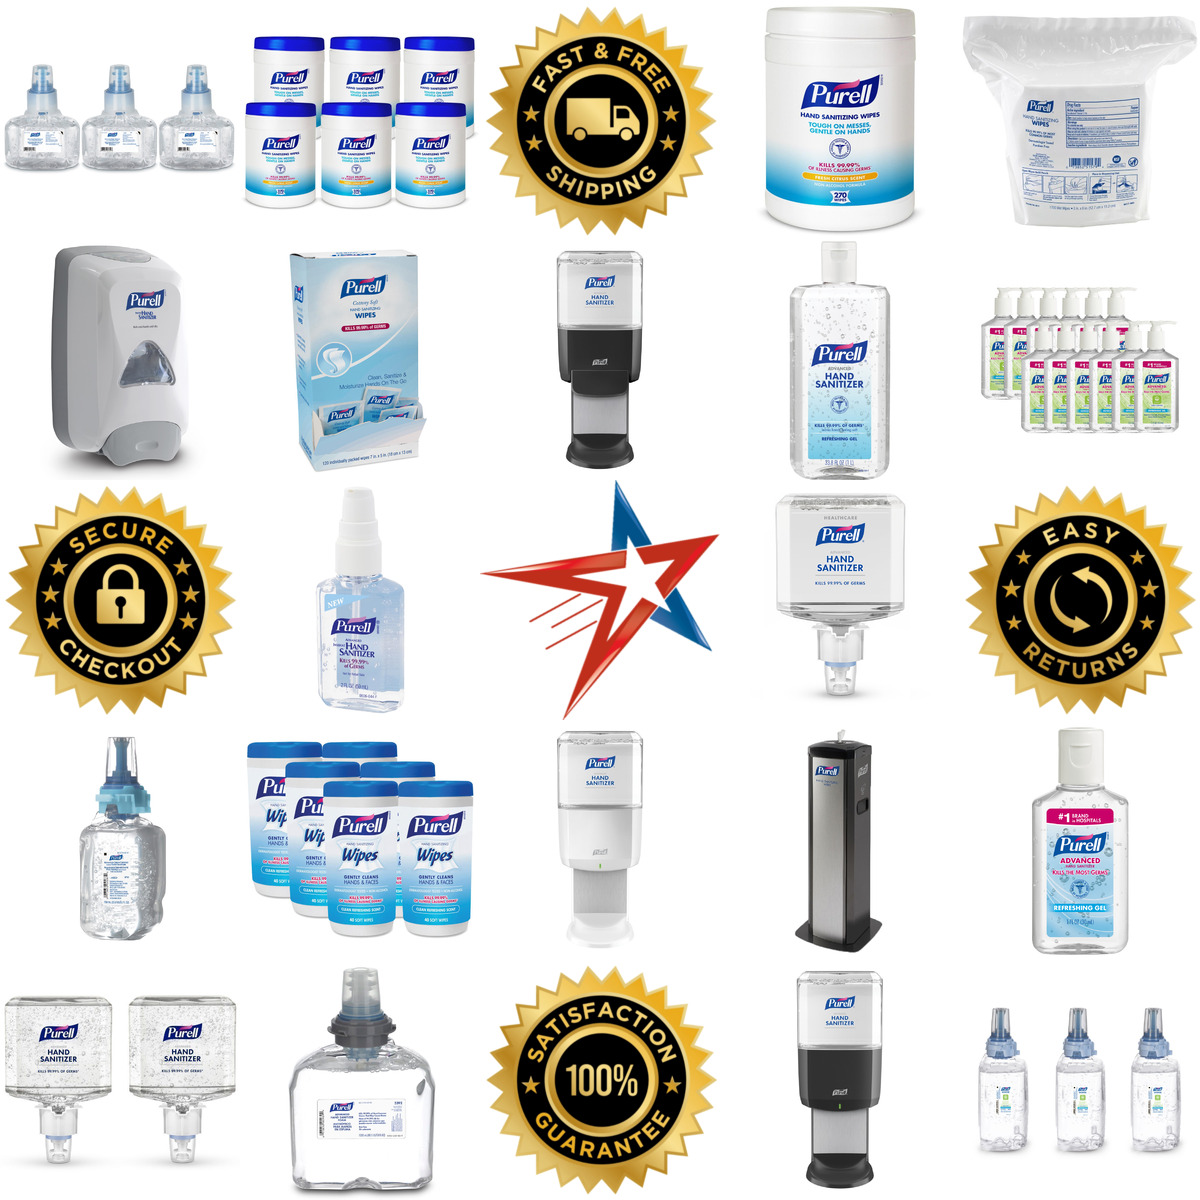 A selection of Gojo Industries Inc products on GoVets